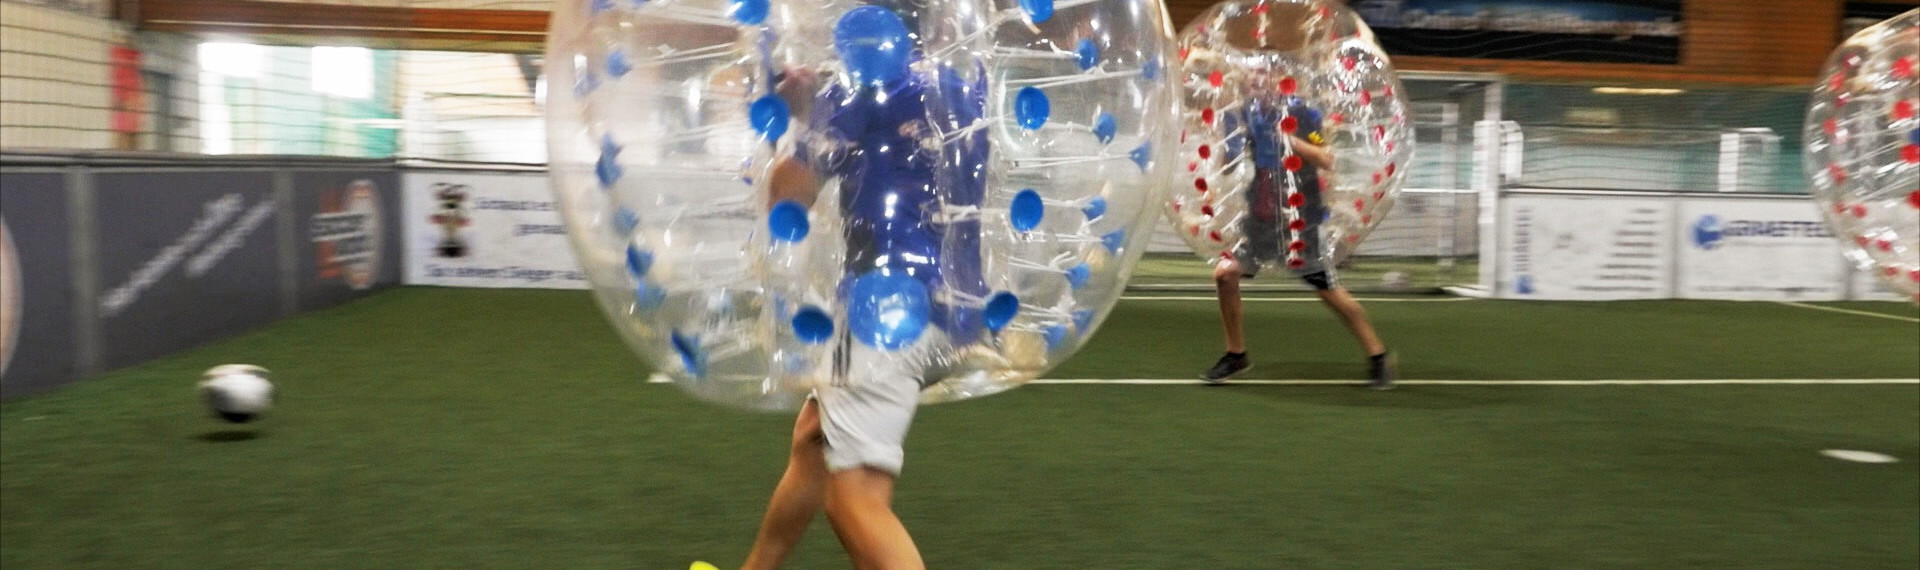 Bubble Football in Cologne | Pissup Tours